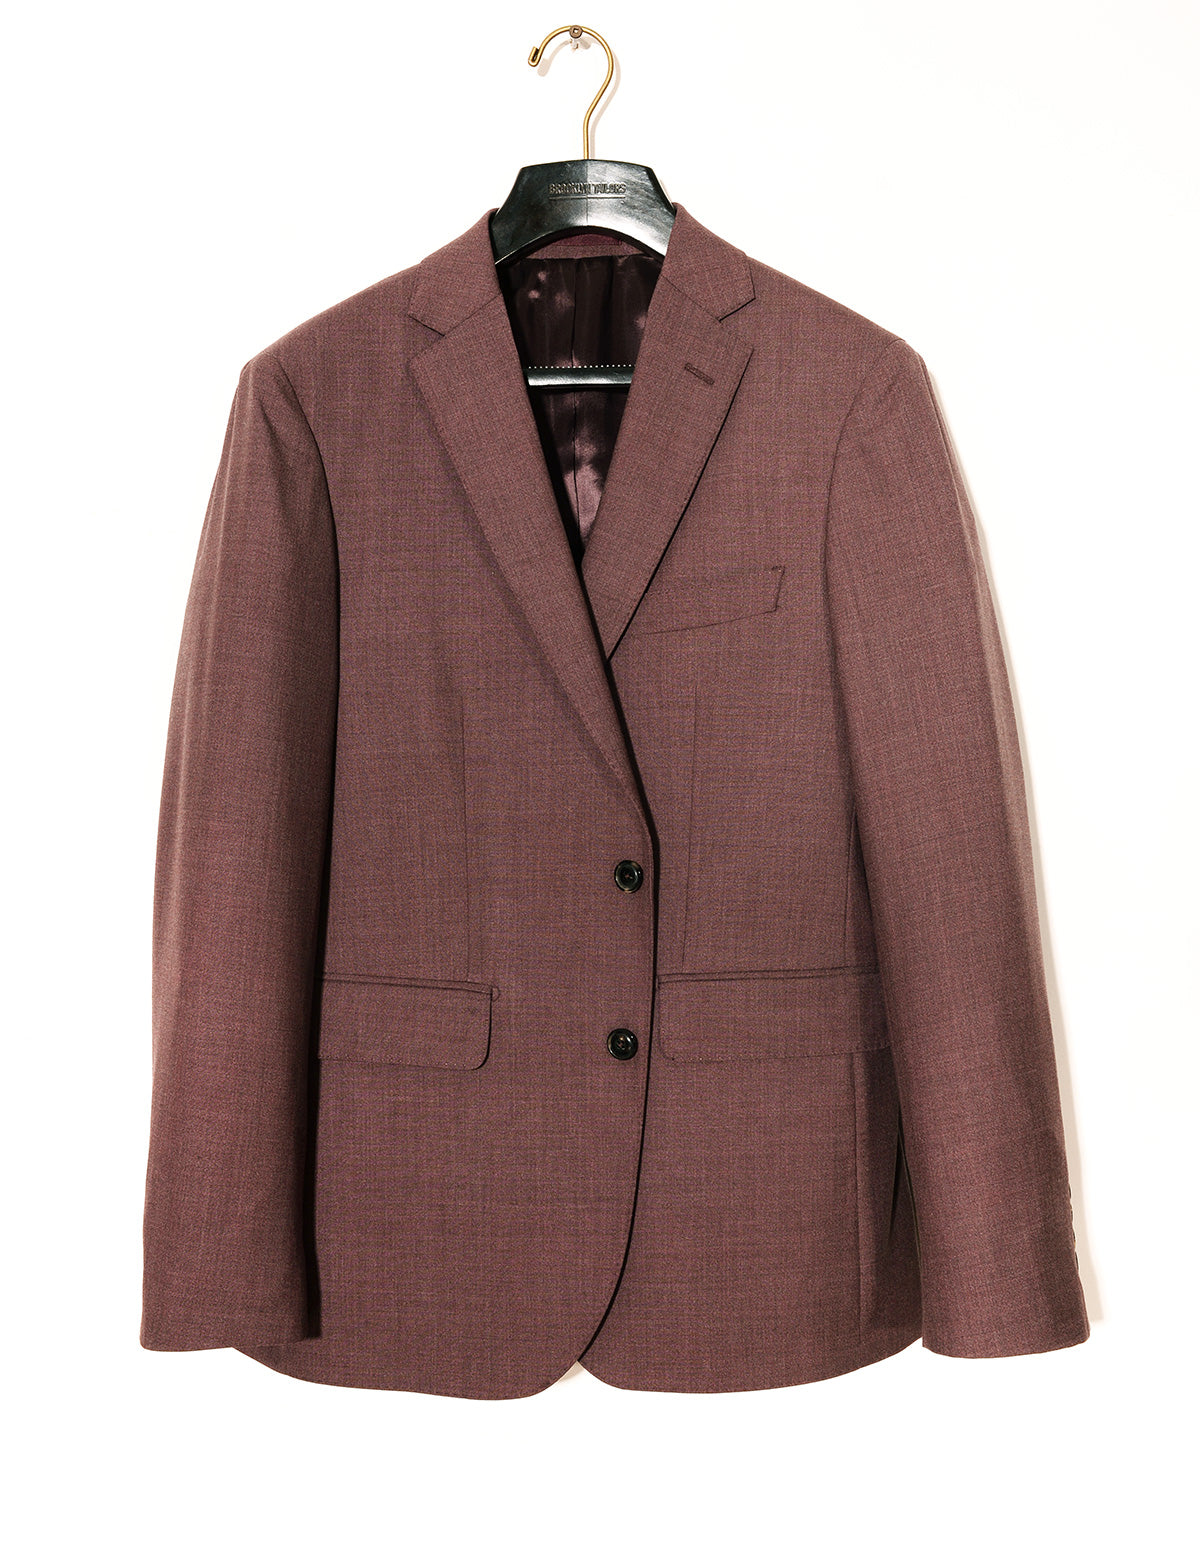 Brooklyn tailors BKT50 Tailored Jacket in 14.5 Micron Mouliné - Cordovan full length shot on hanger